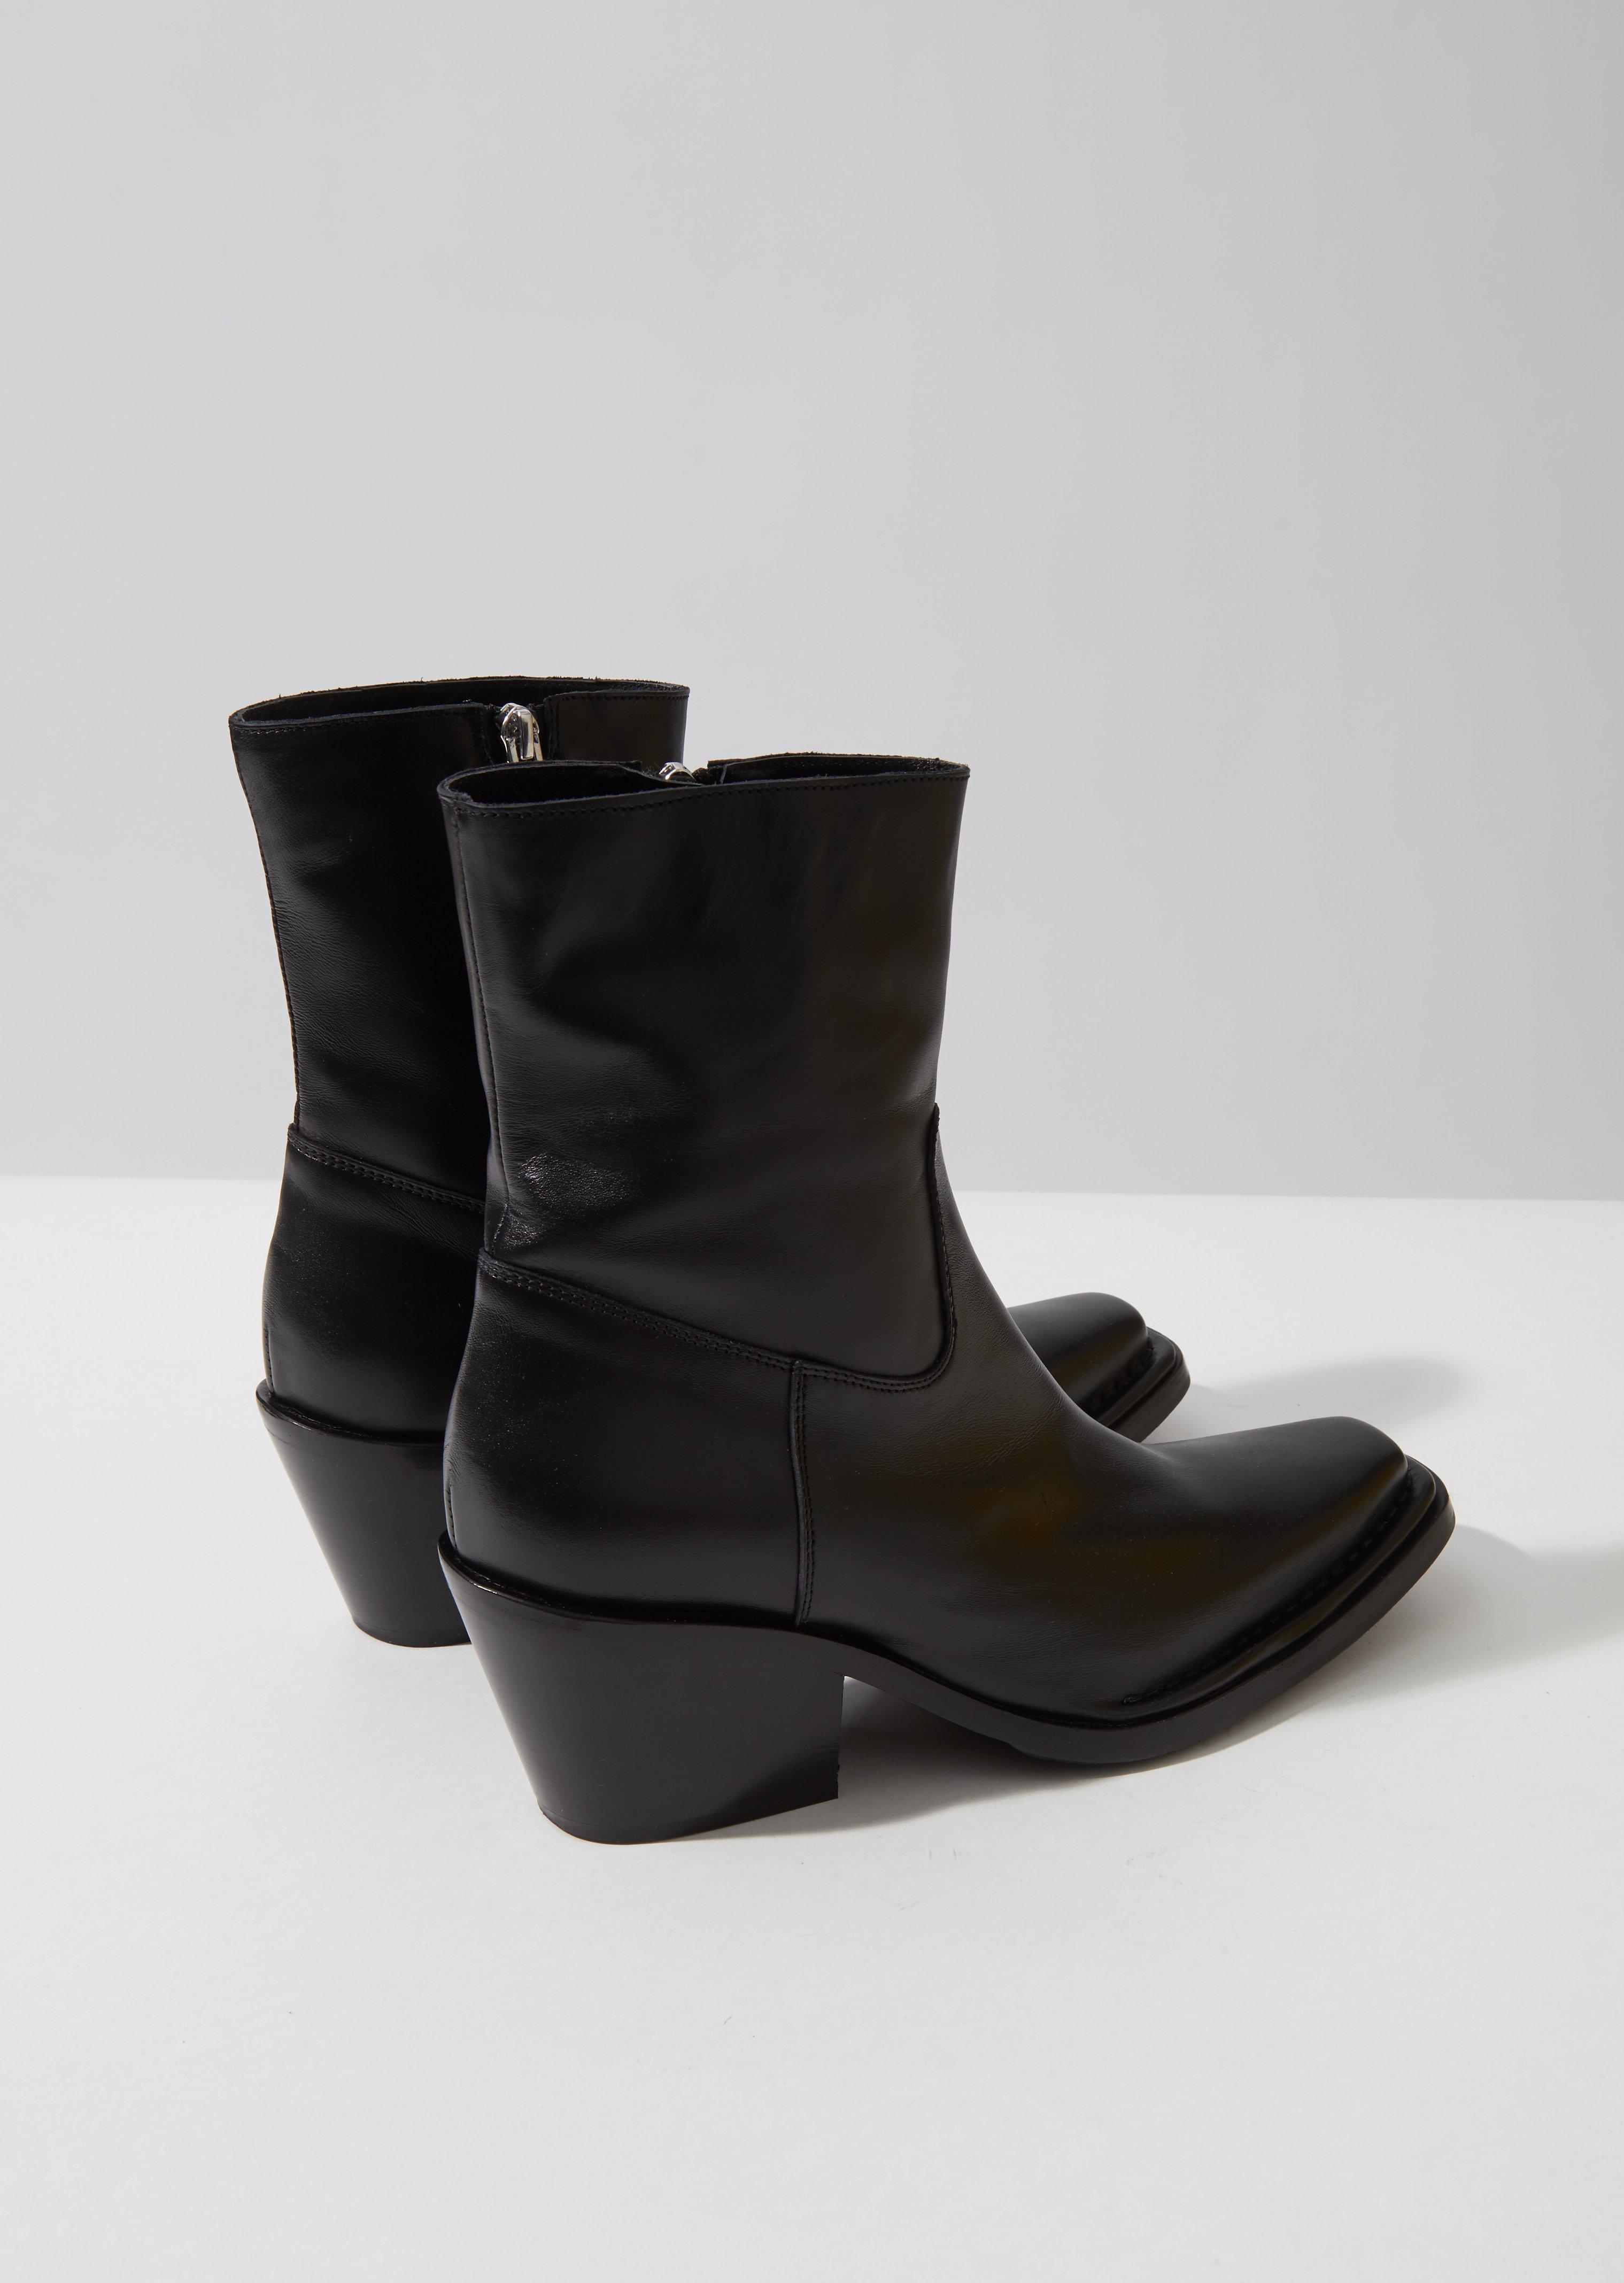 Acne Studios Leather Bruna Boots in Black - Lyst